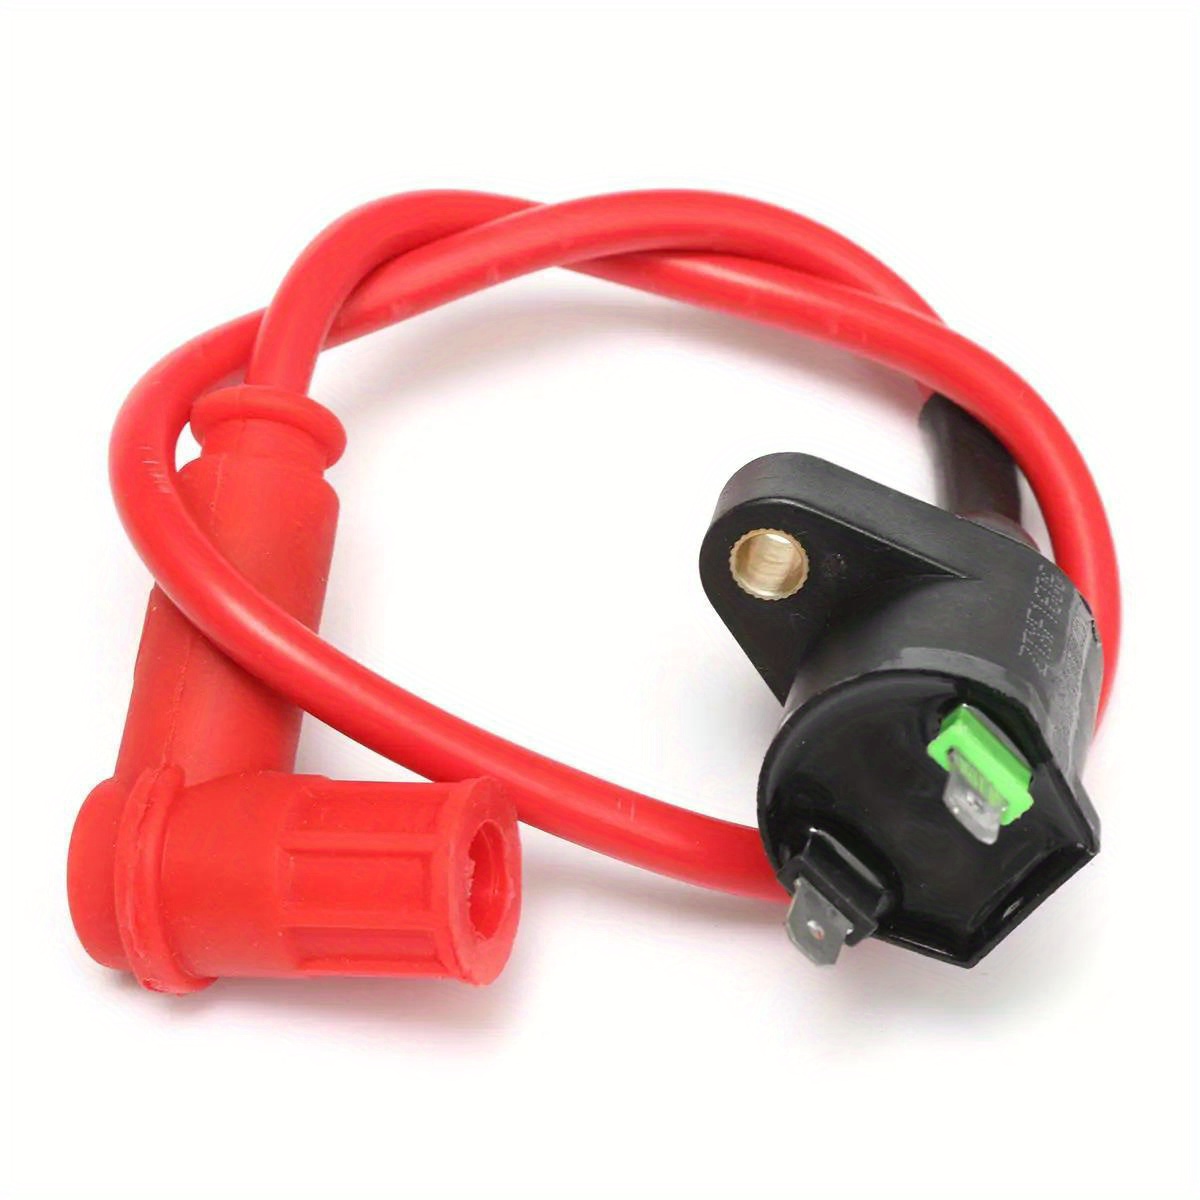 racing ignition coil for 50cc 250cc chinese scooter atv pit dirt bike buggy quad motorcycle parts details 0